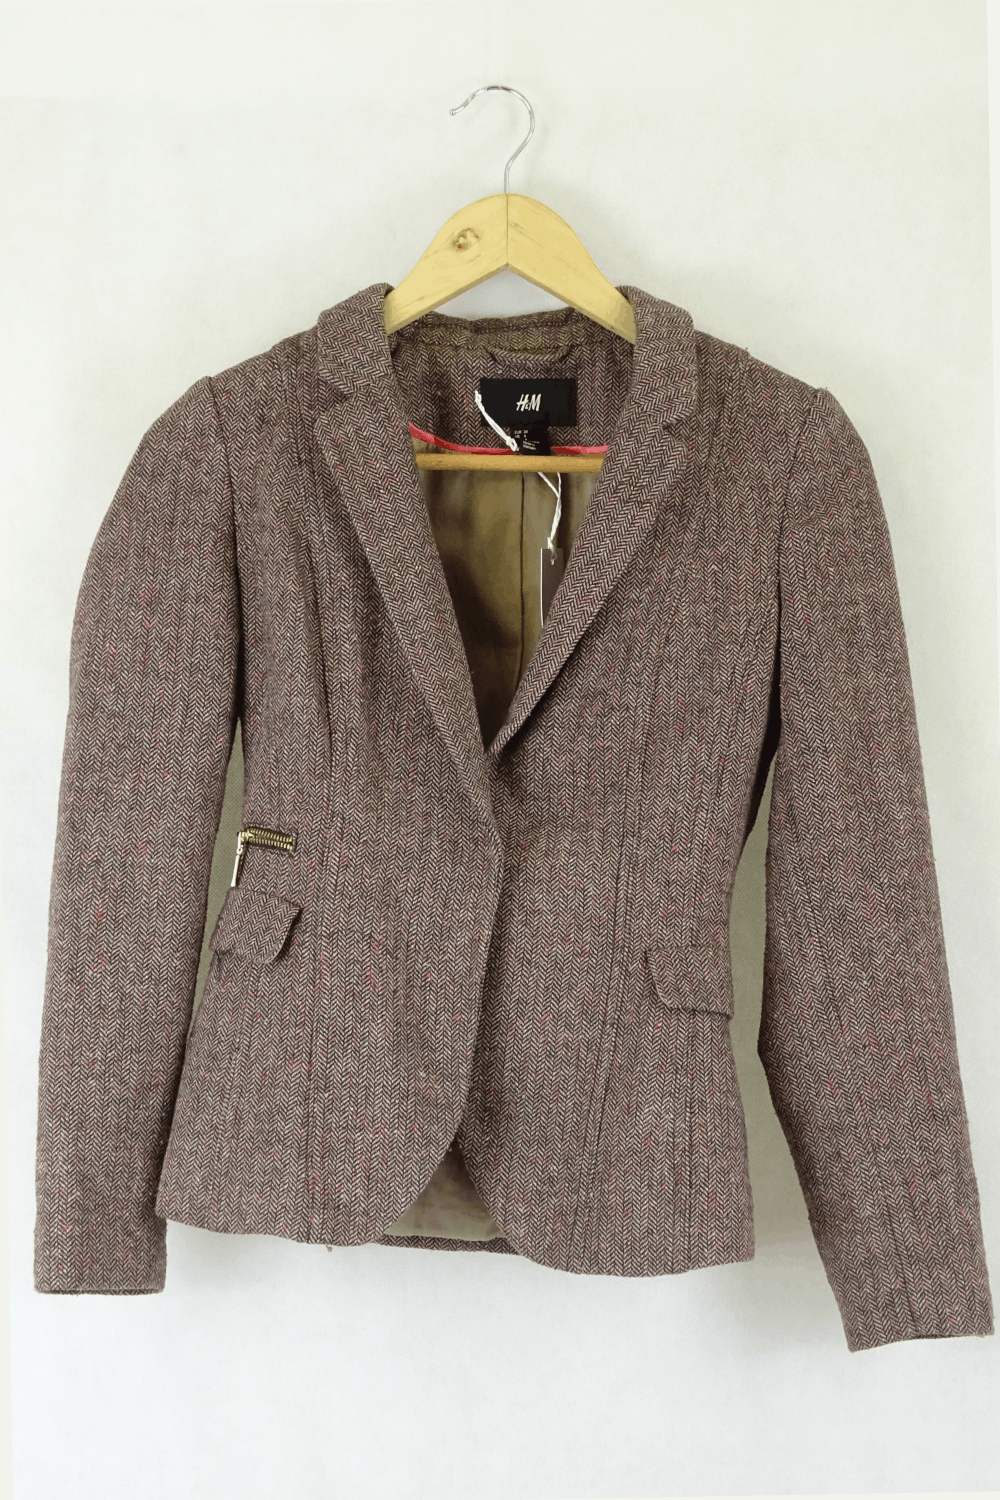 H&M Woven Brown Jacket 4